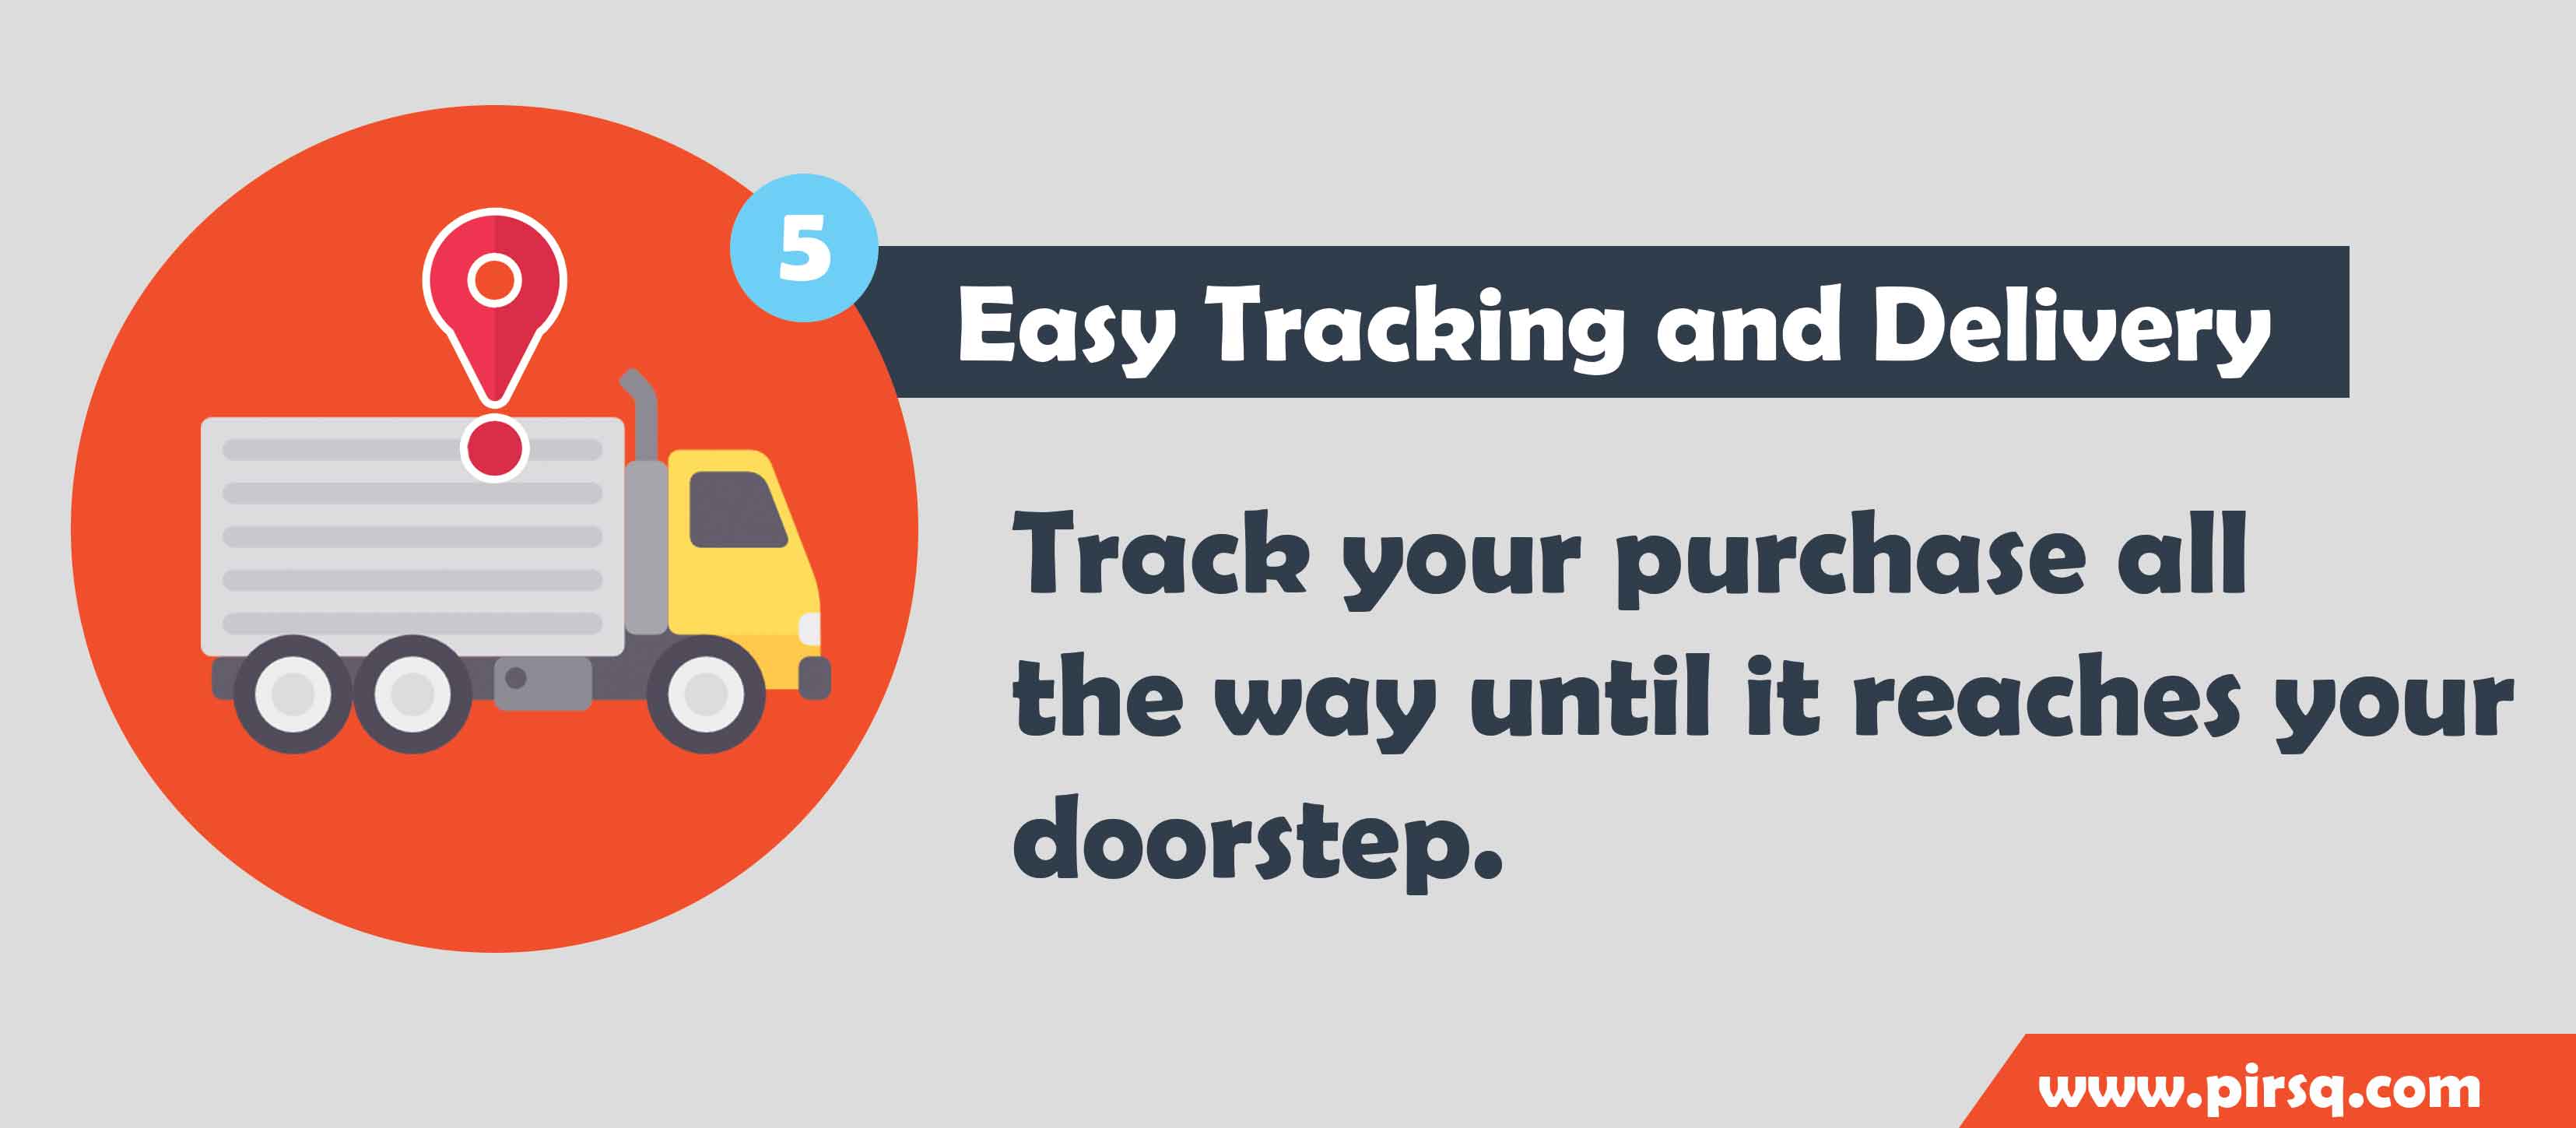 Track your purchase all the way until it reaches your doorstep!